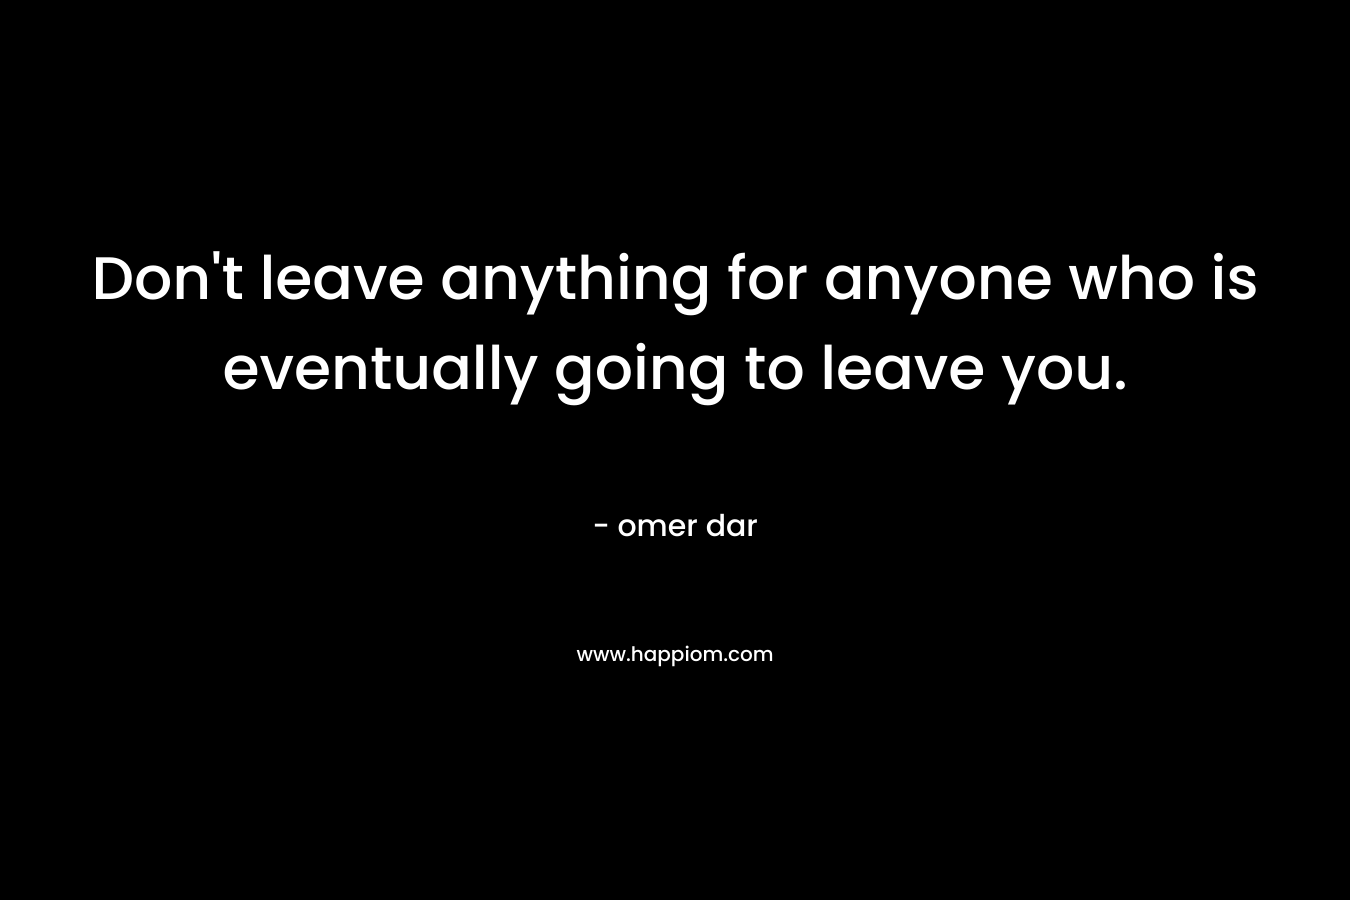 Don't leave anything for anyone who is eventually going to leave you.